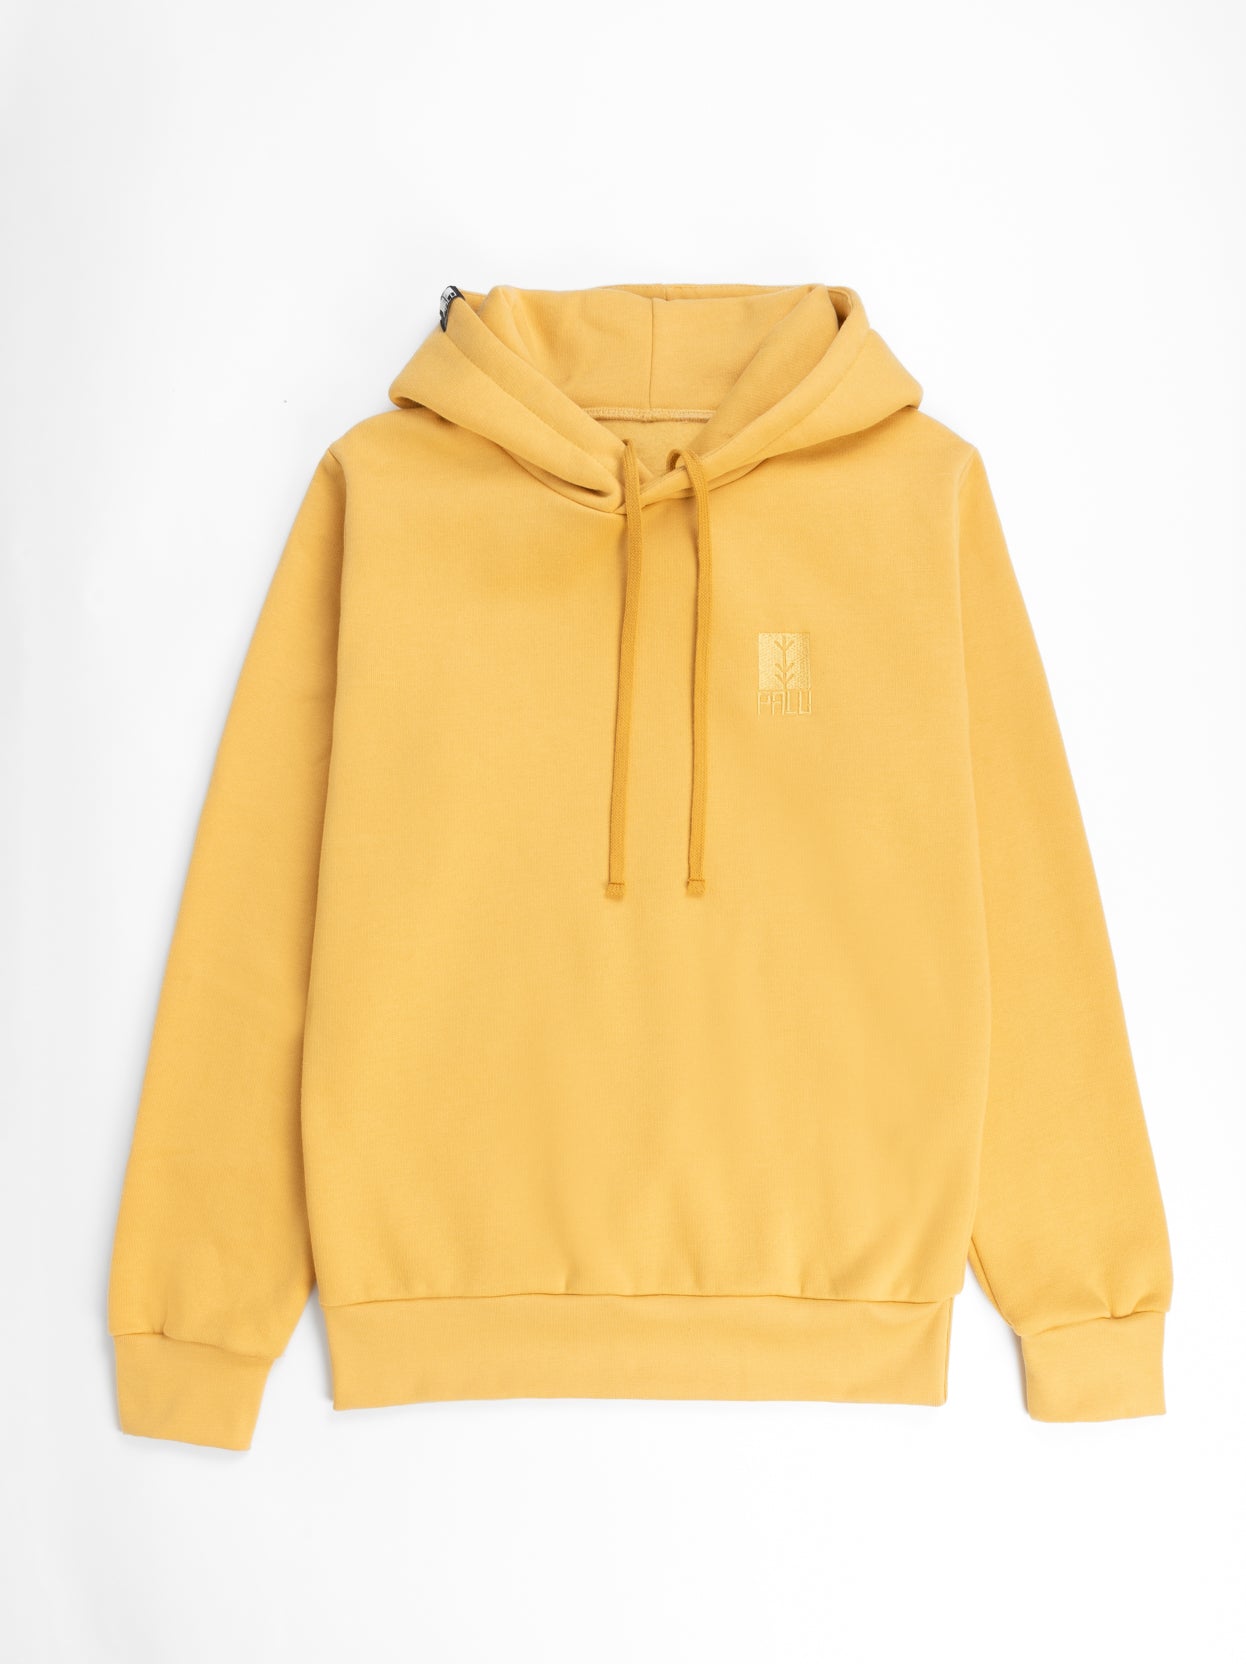 Yellow Hoodie front